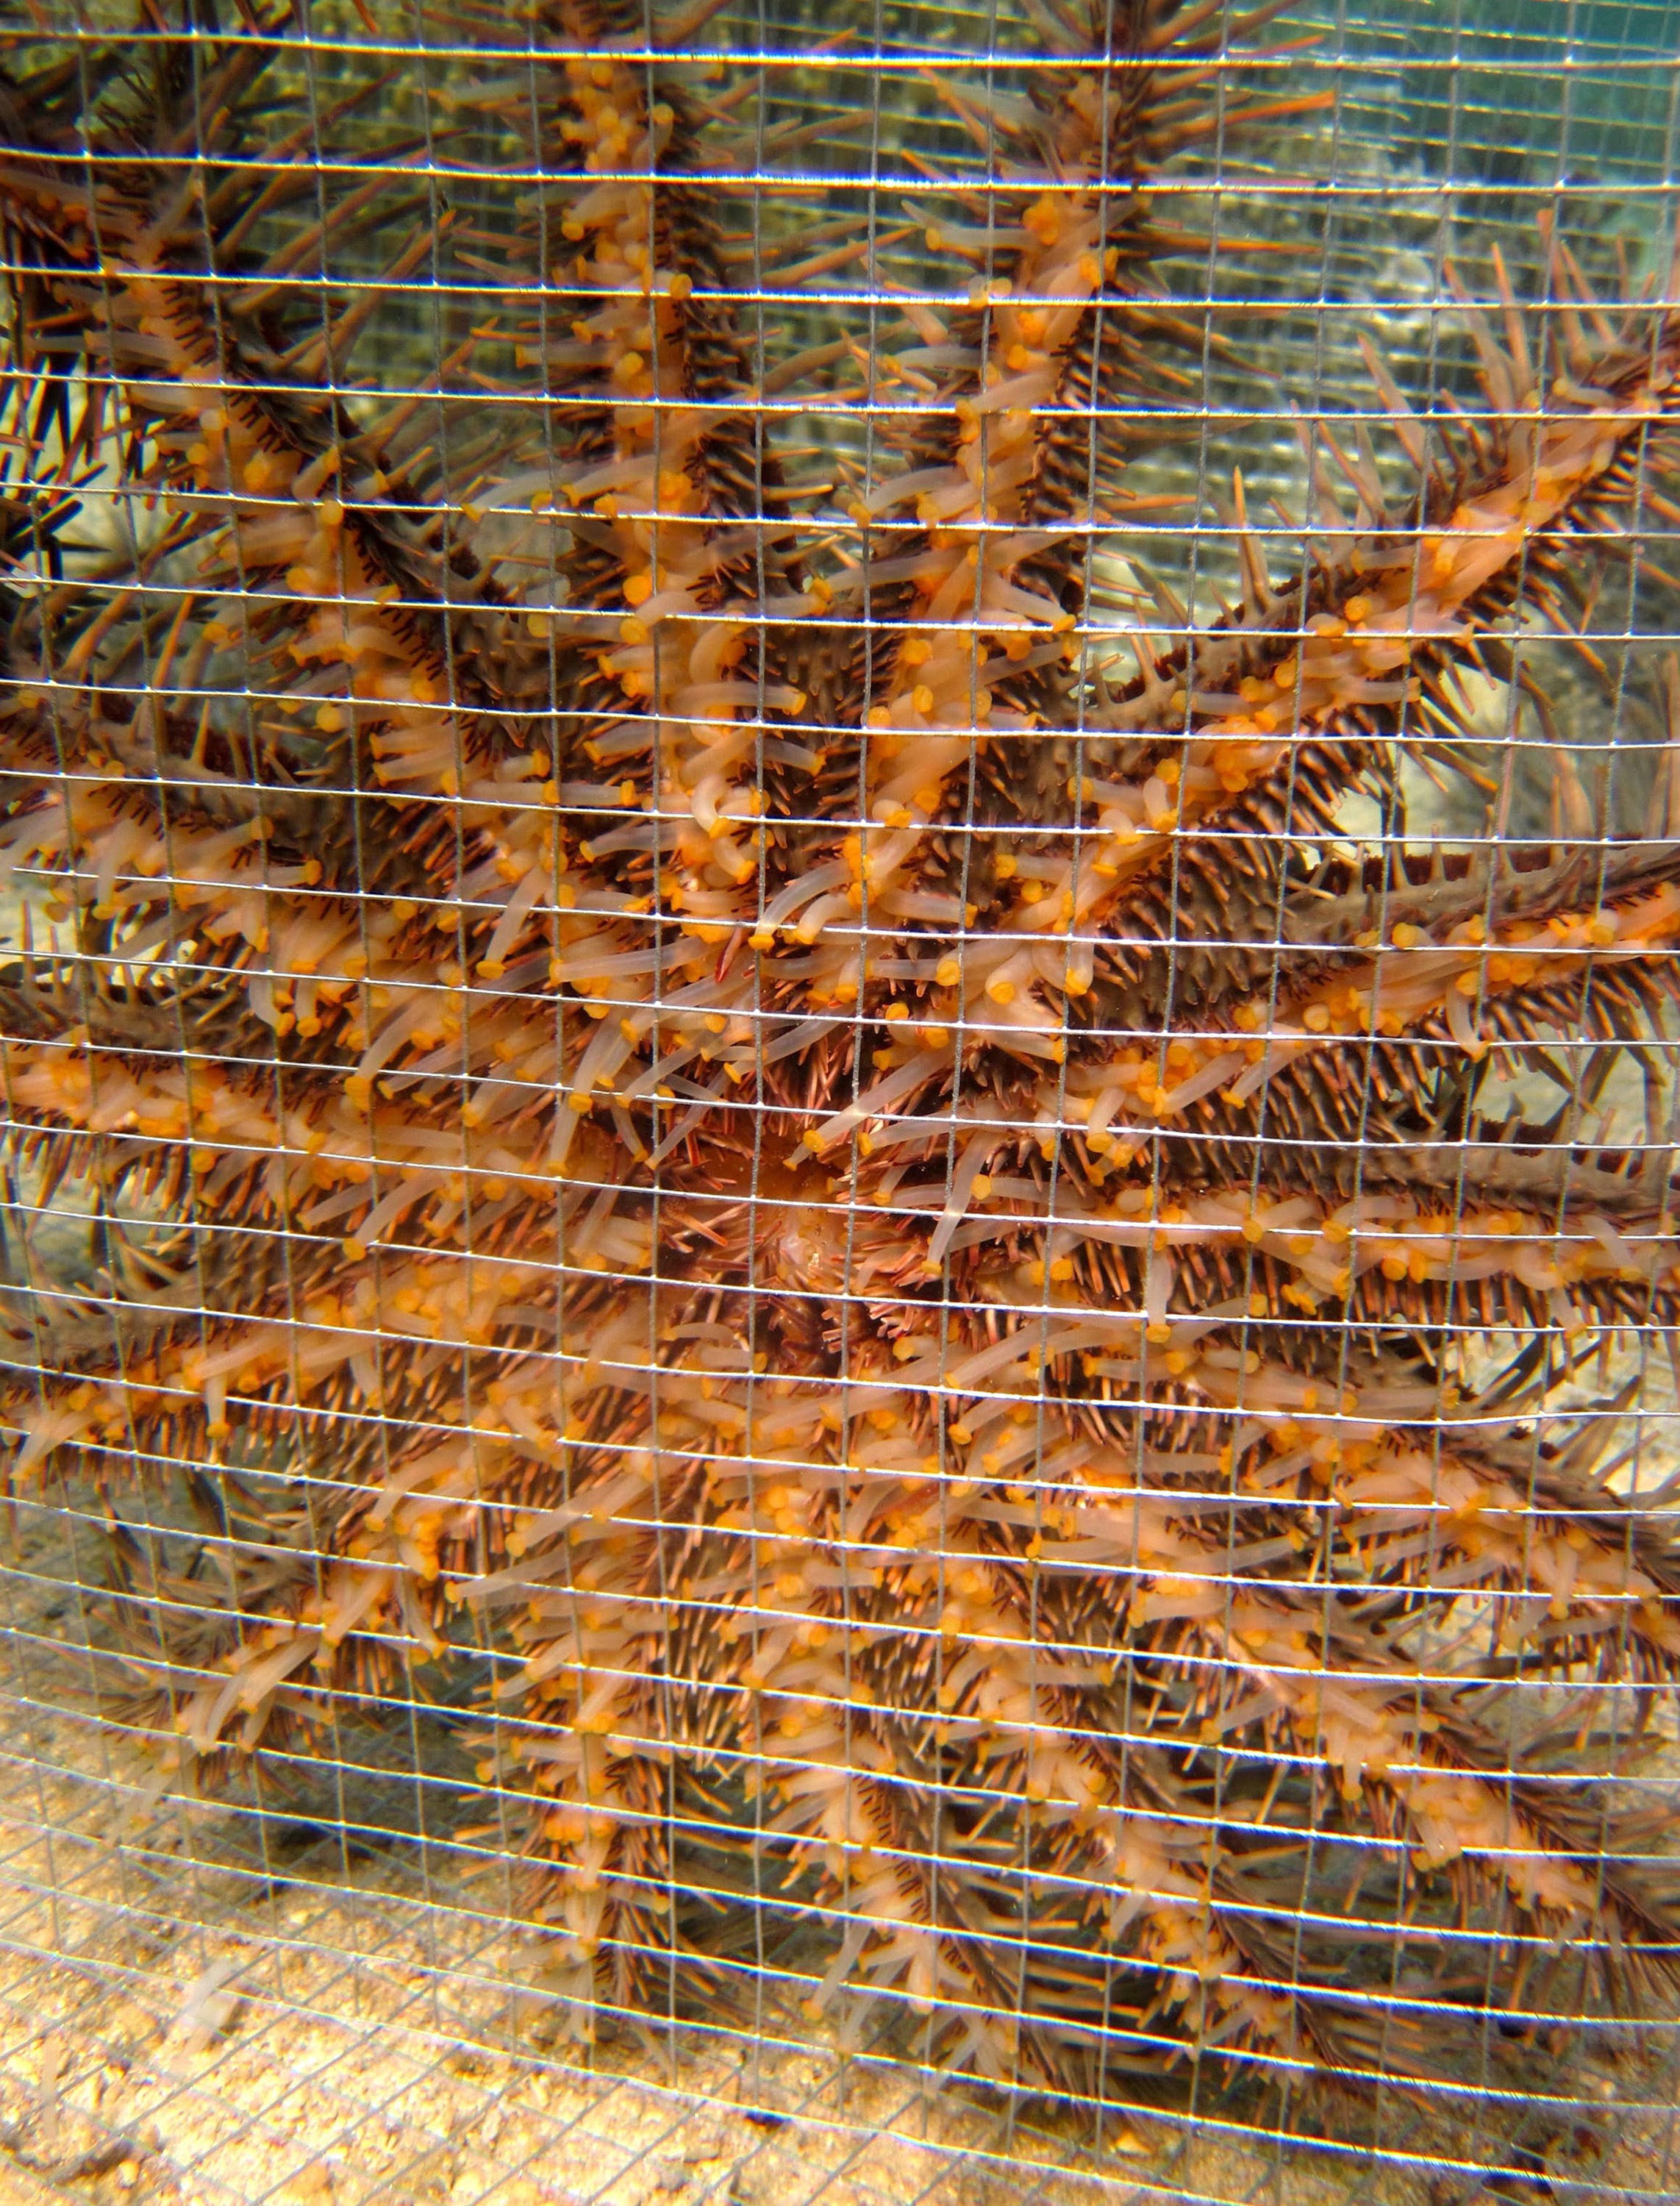 A crown-of-thorns sea star is shown in a cage used to hold the animals prior to release at the border of a marine protected area in the Fiji Islands. (Credit: Cody Clements, Georgia Tech)